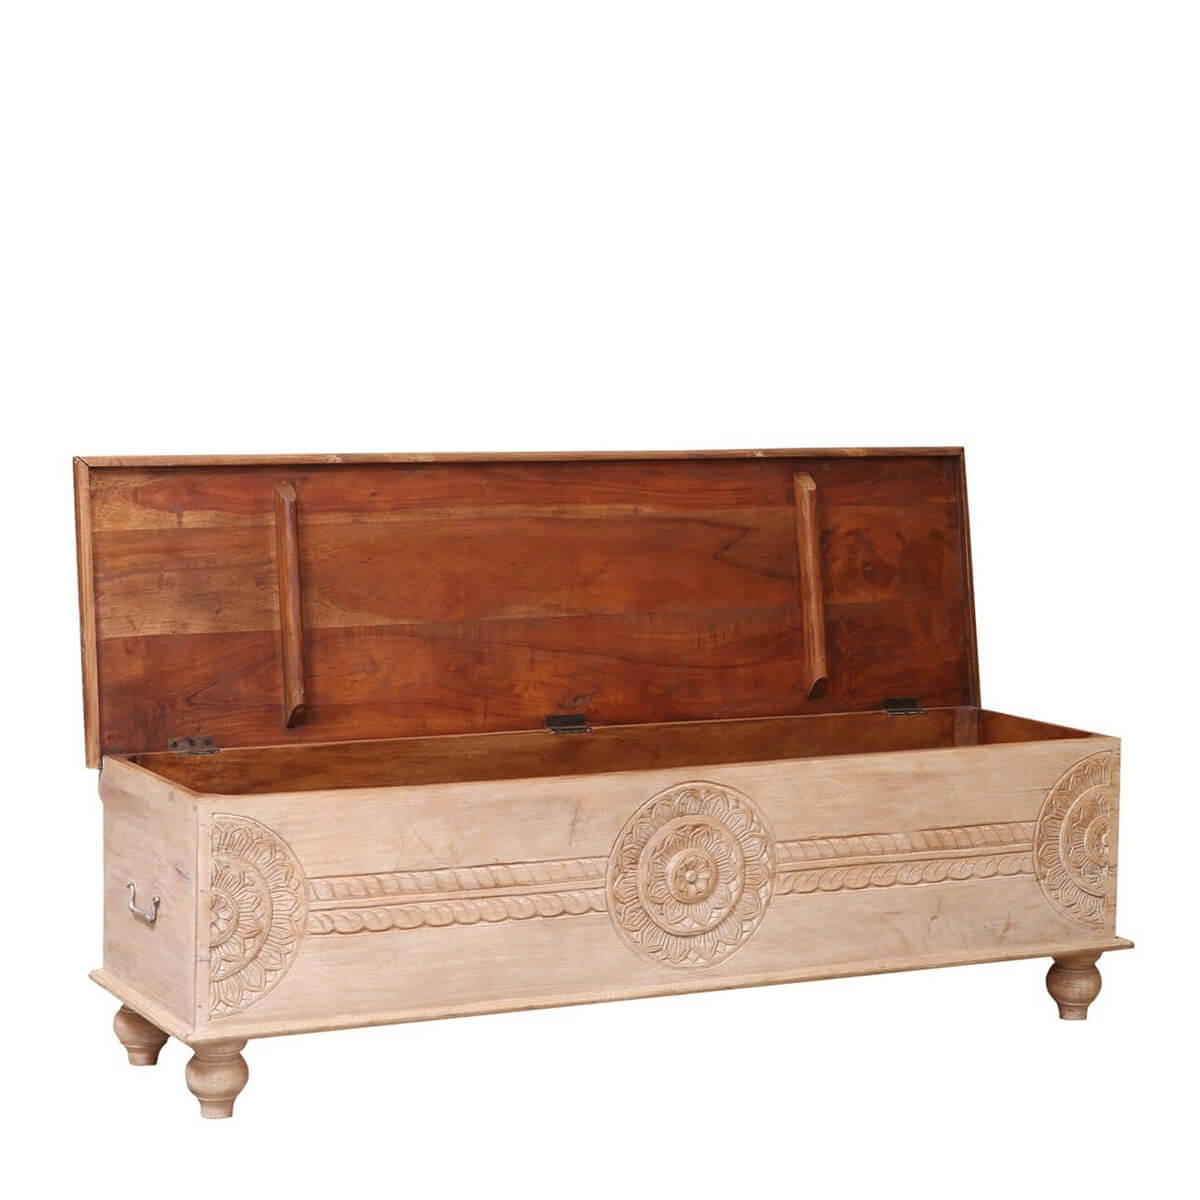 Osmond Rustic Reclaimed Wood Floral Hand Carved  Storage Trunk Chest